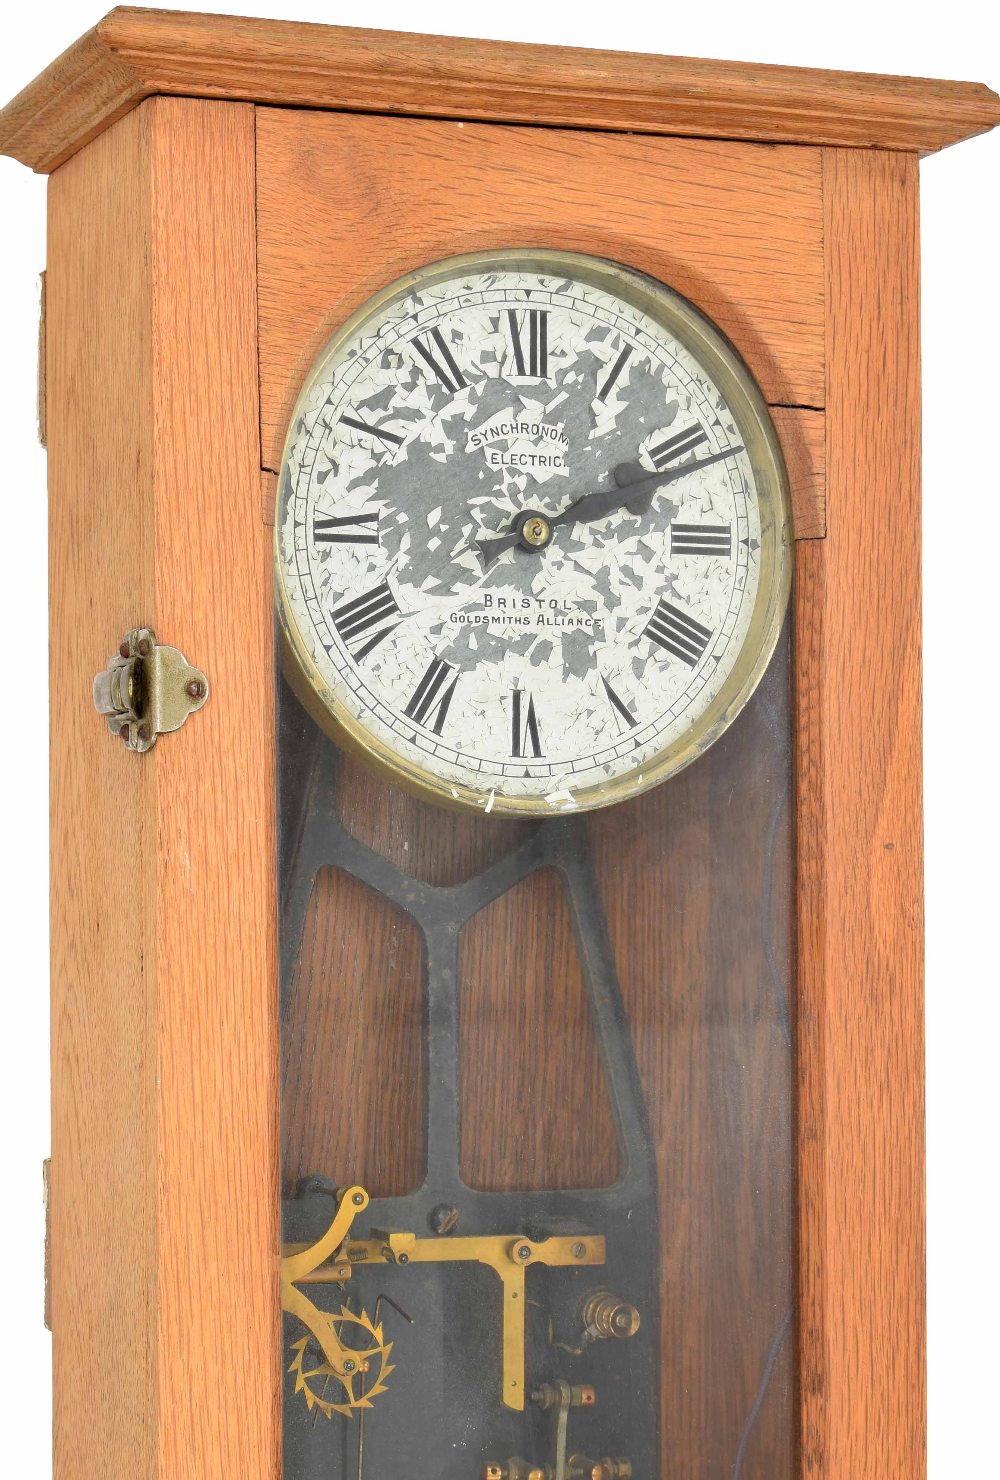 Synchronome Electric master clock, the 6.25" white painted dial signed Synchronome Electric, - Image 2 of 4